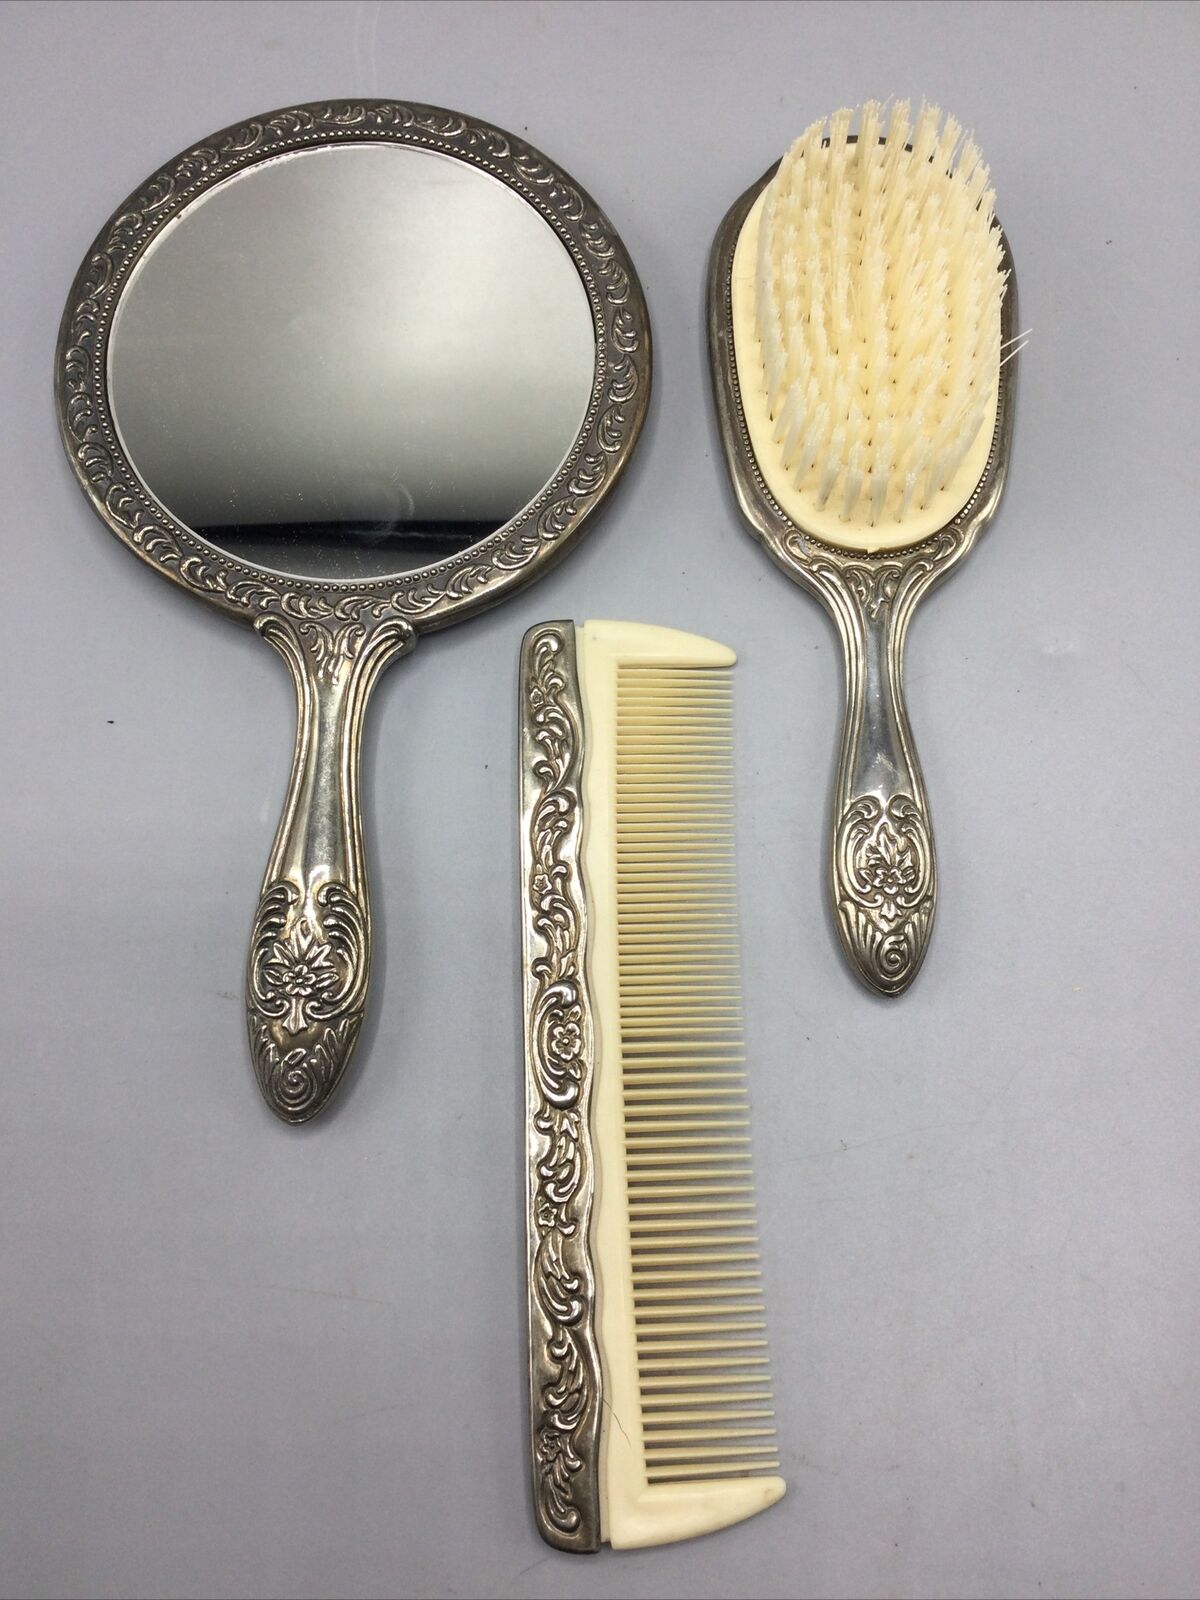 Vintage Antique Silver Plated Handheld Mirror, Brush, Comb